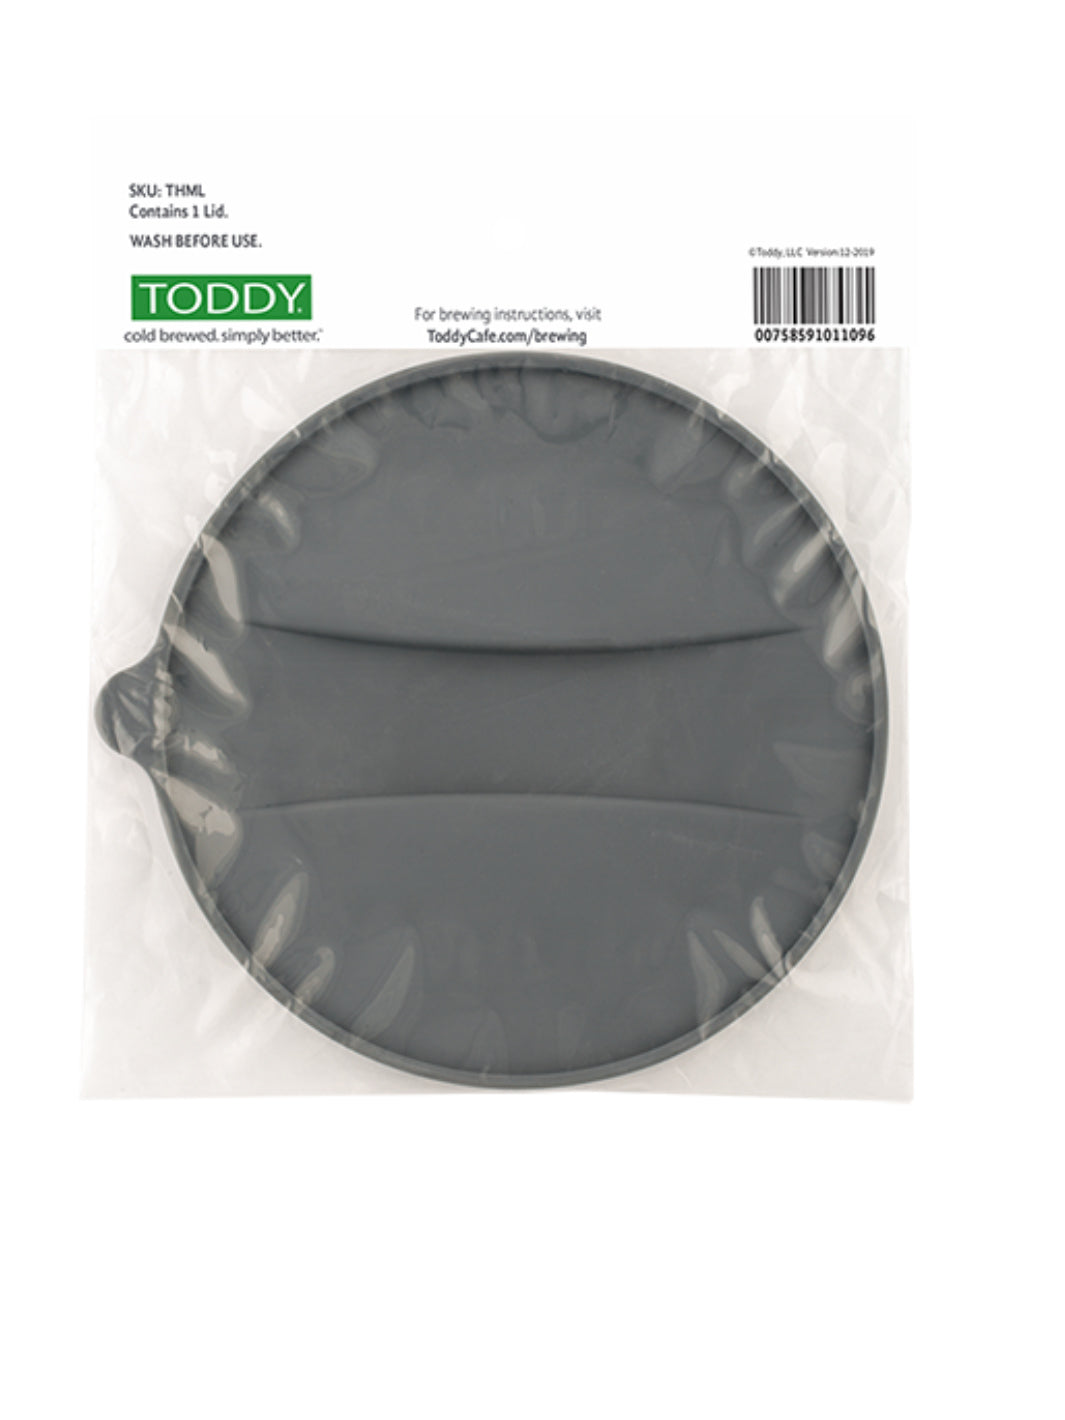 TODDY Home Replacement Brewer Lid